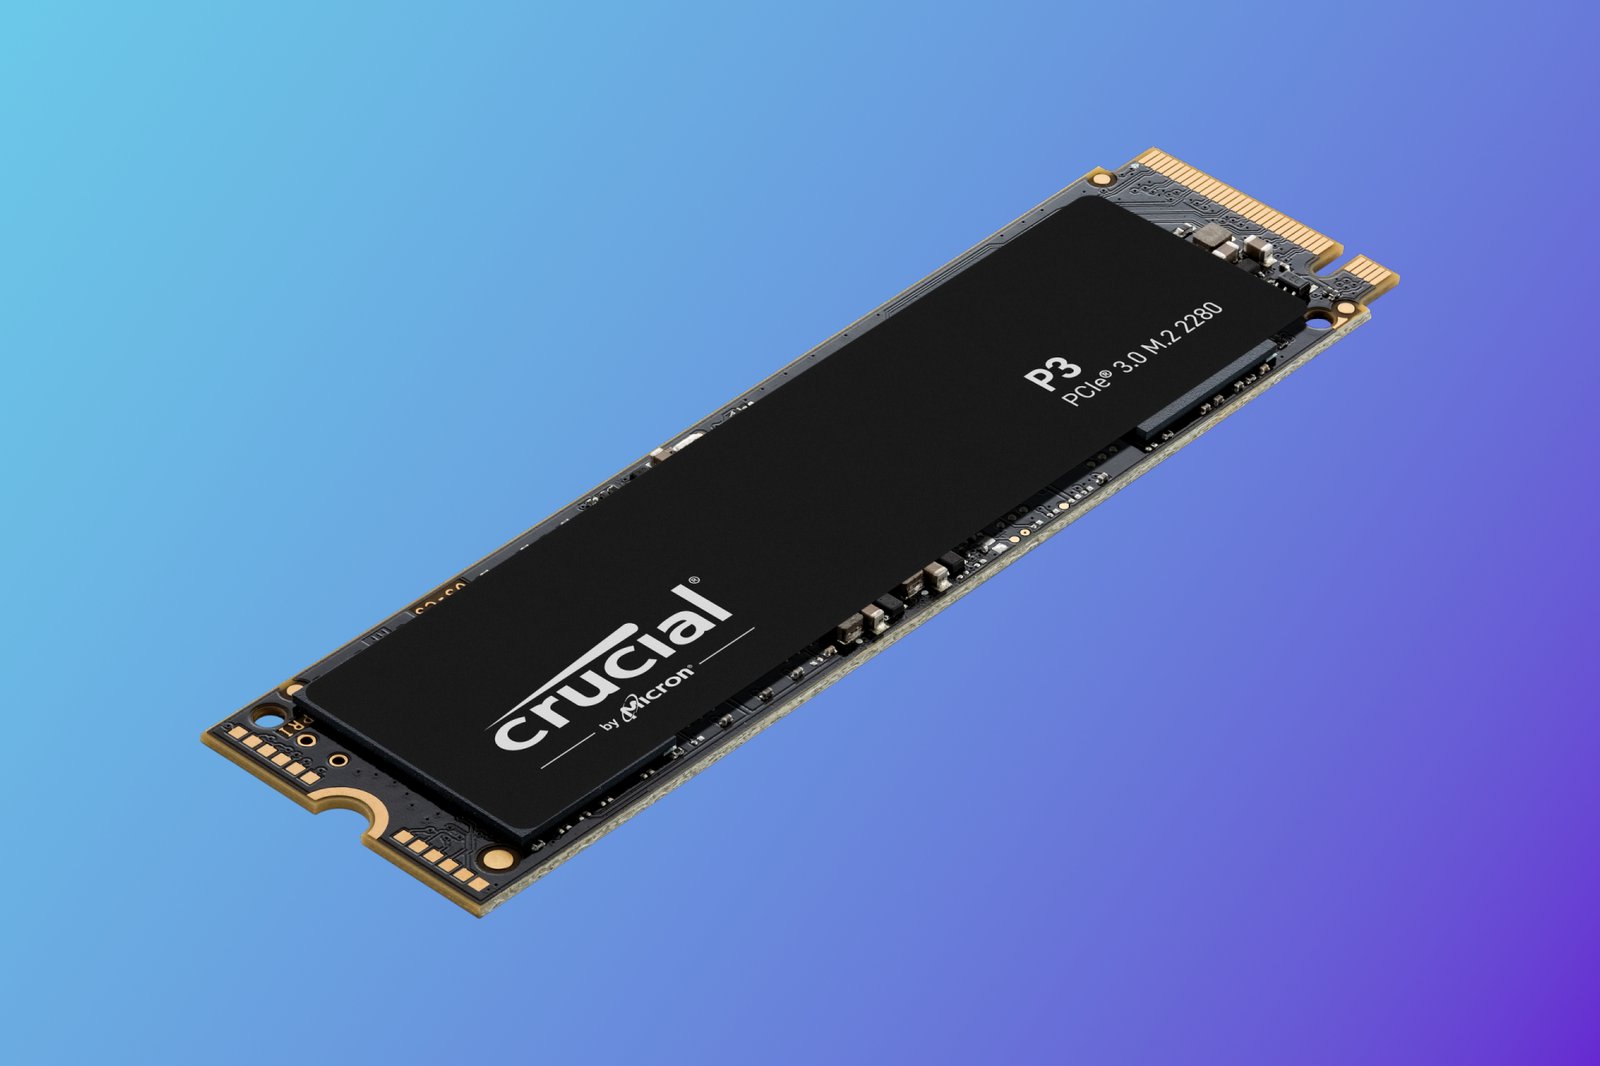 Rep one of our favourite SSDs for ludicrously cheap: 2TB for $120